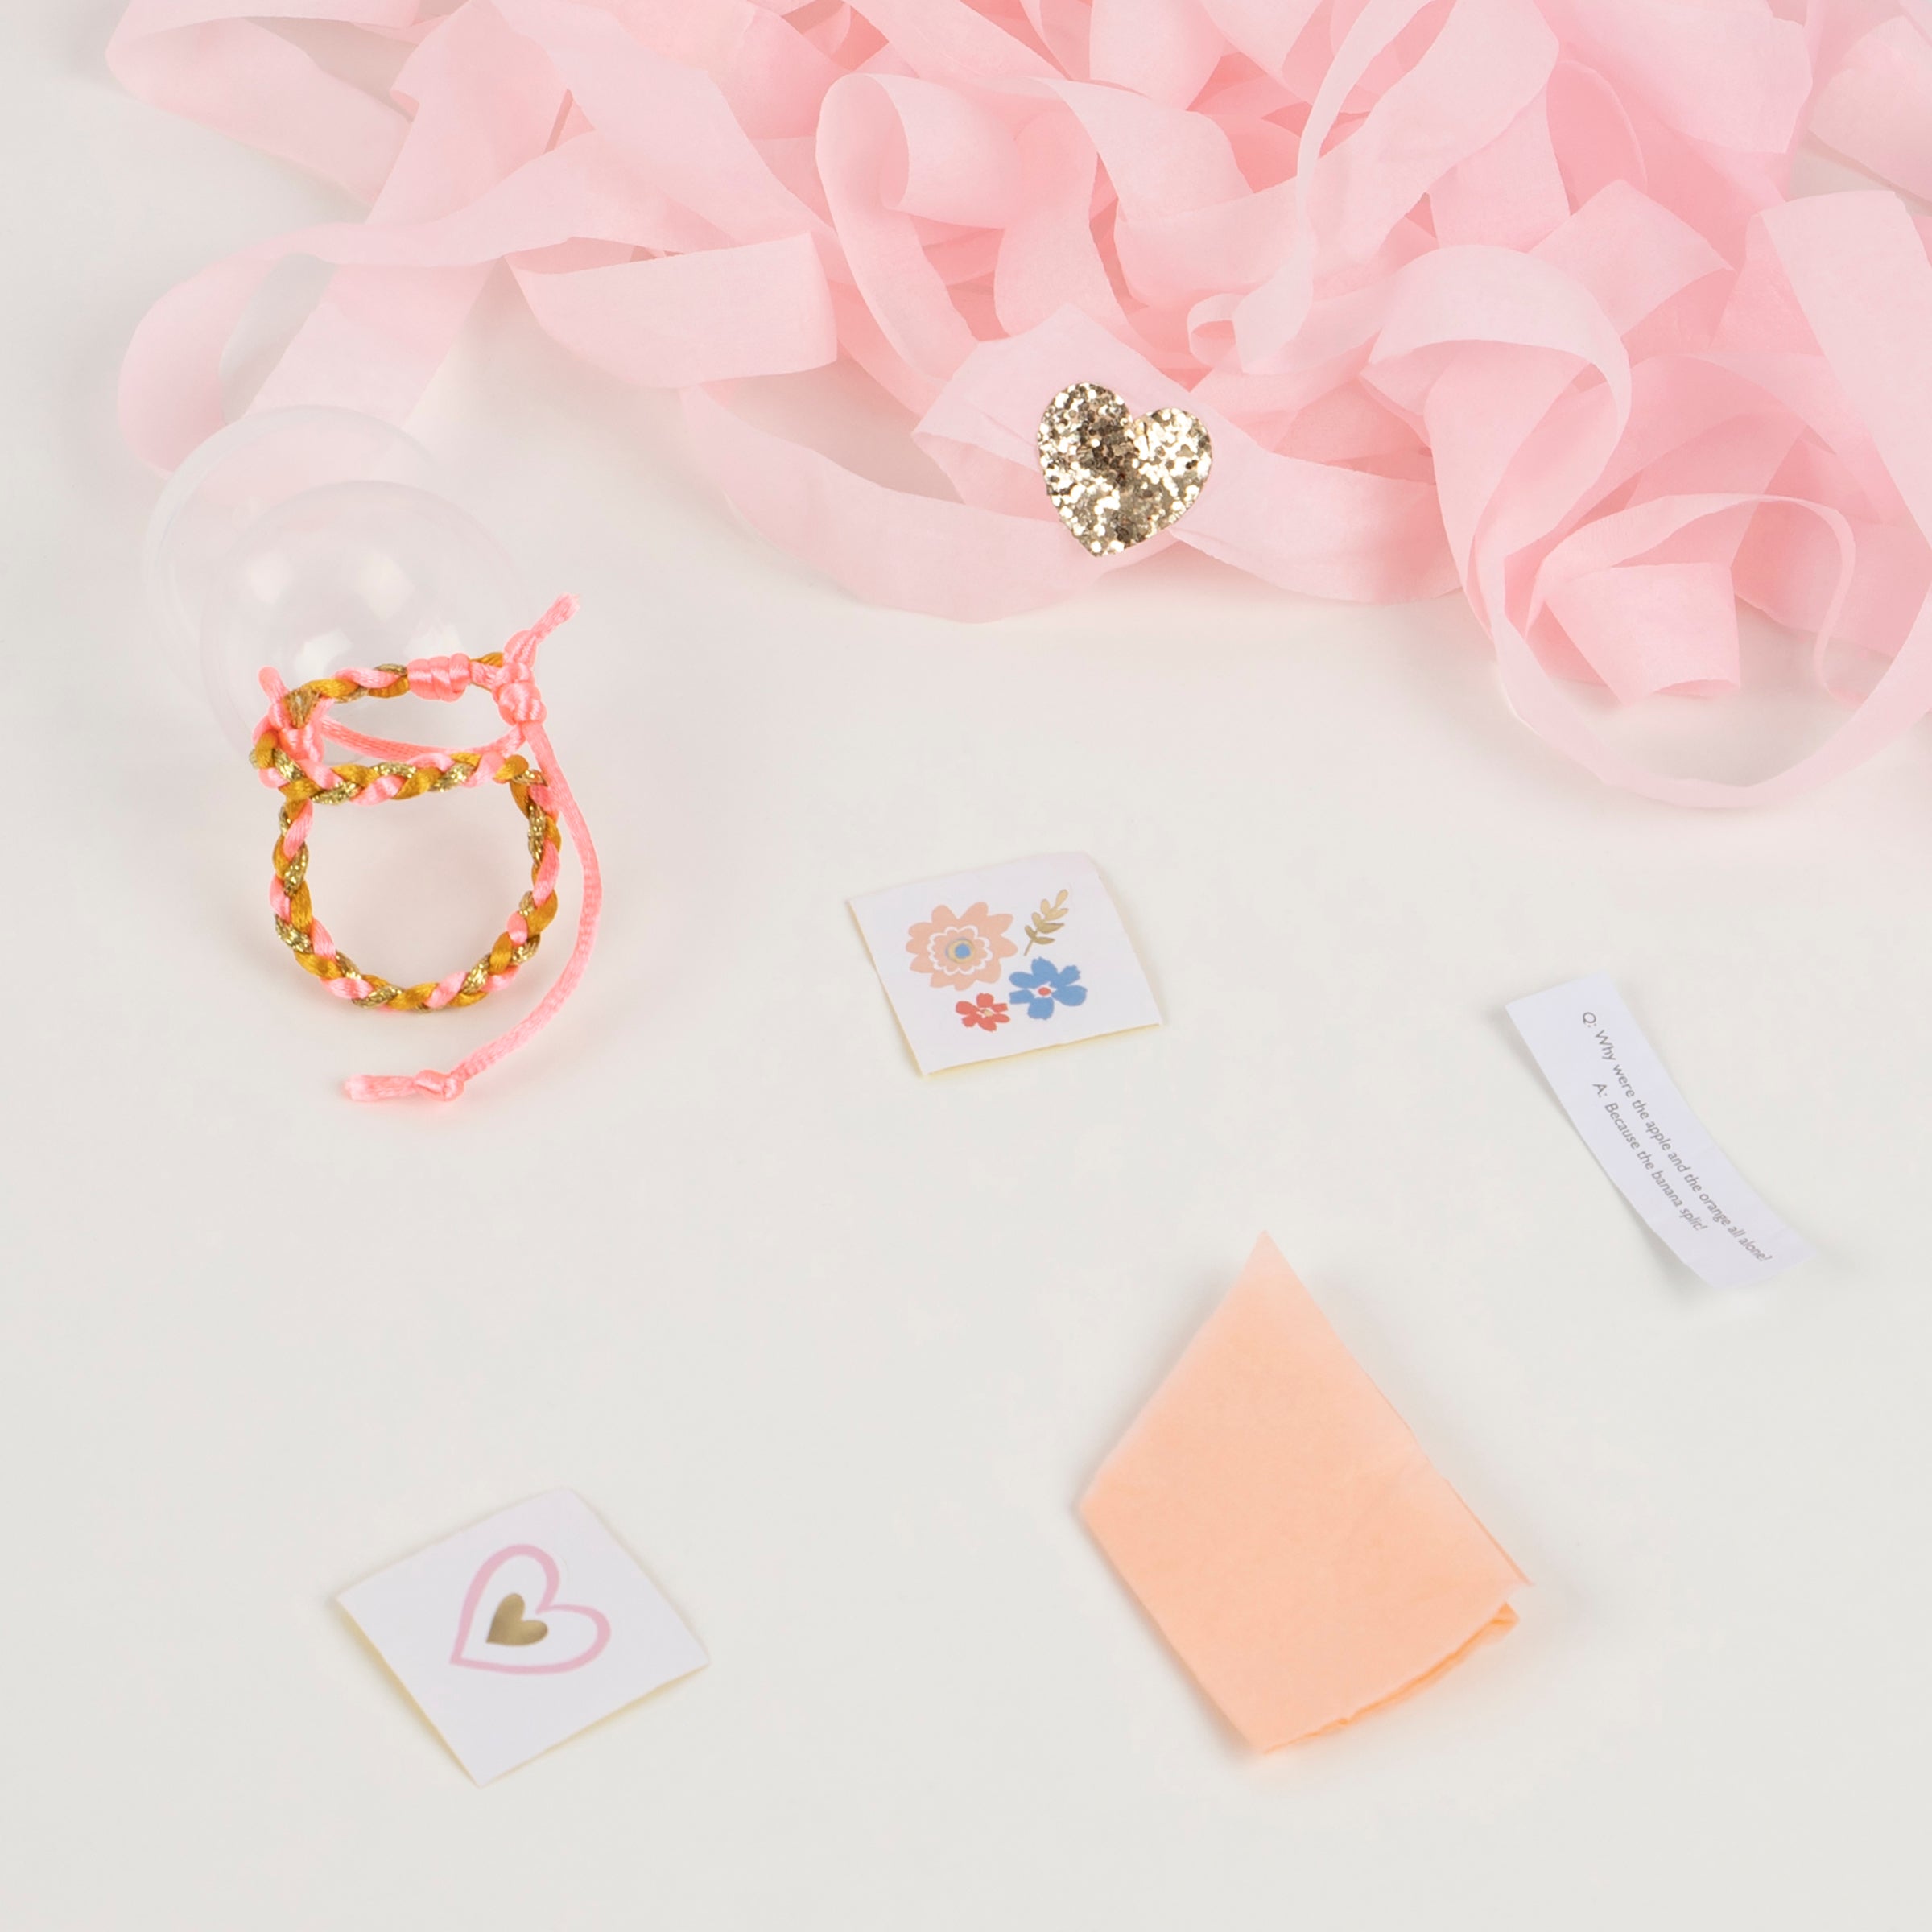 These are crafted with pink tones of crepe paper, and feature friendship bracelets, paper party hats and foil stickers.